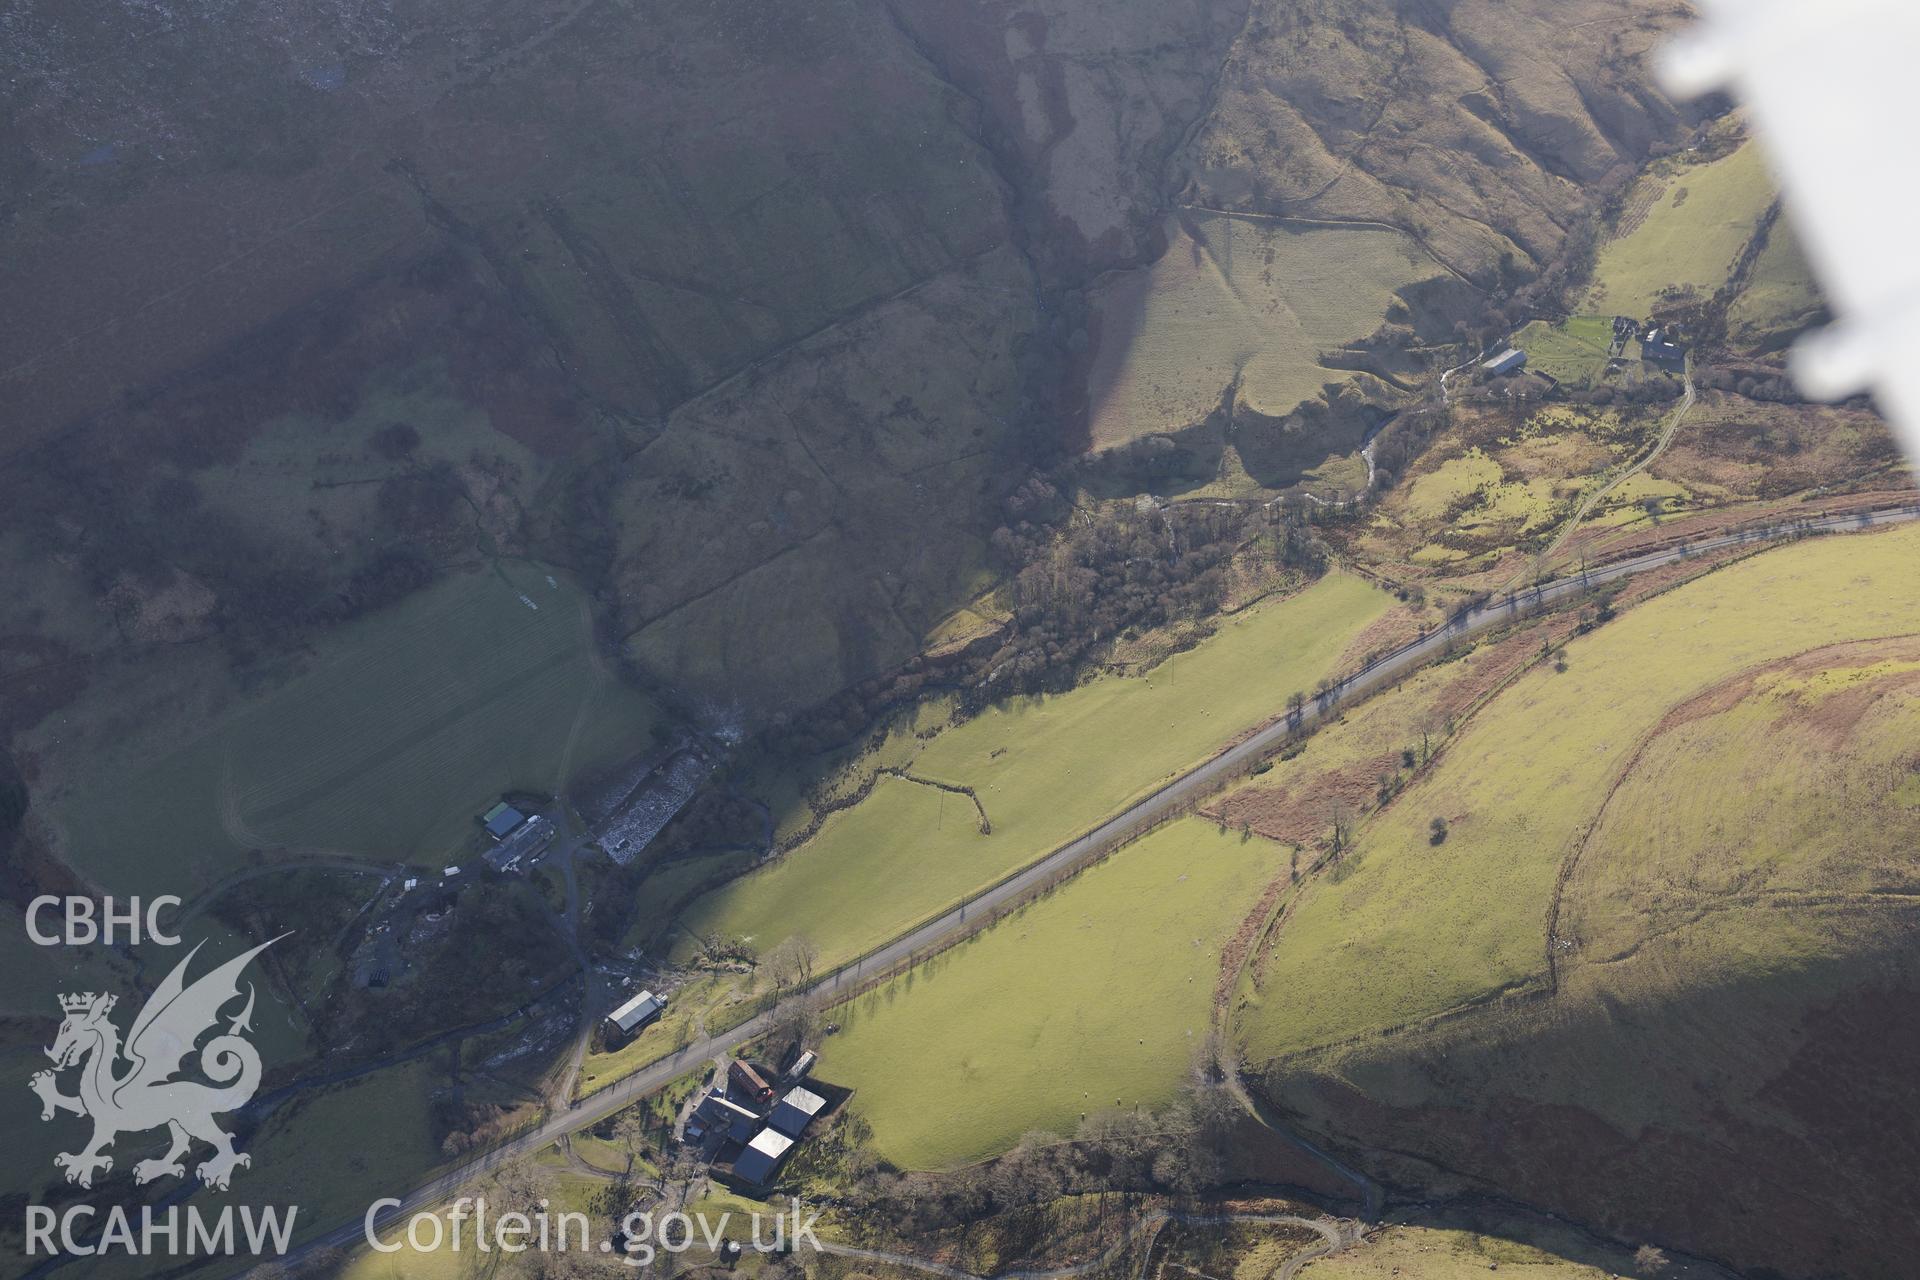 View of Llawr-y-Cae farm (top) and Penantigi Isaf farm (below) from the north. Oblique aerial photograph taken during the Royal Commission's programme of archaeological aerial reconnaissance by Toby Driver on 4th February 2015.